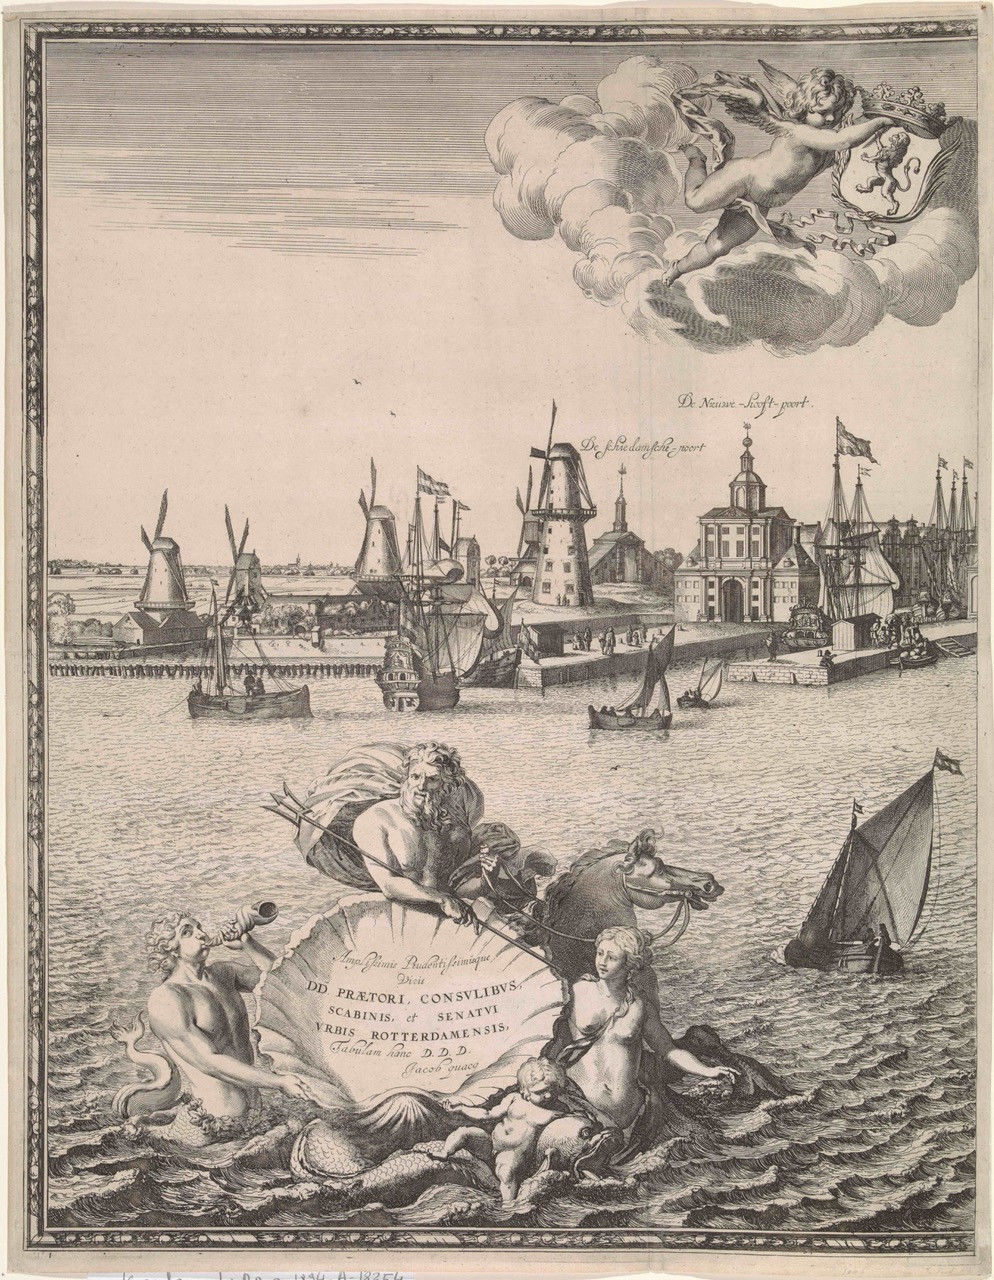 Joost van Geel (Published by Jacob Quack), Panoramic view of Rotterdam, “1665” [=not before 1675], detail. 